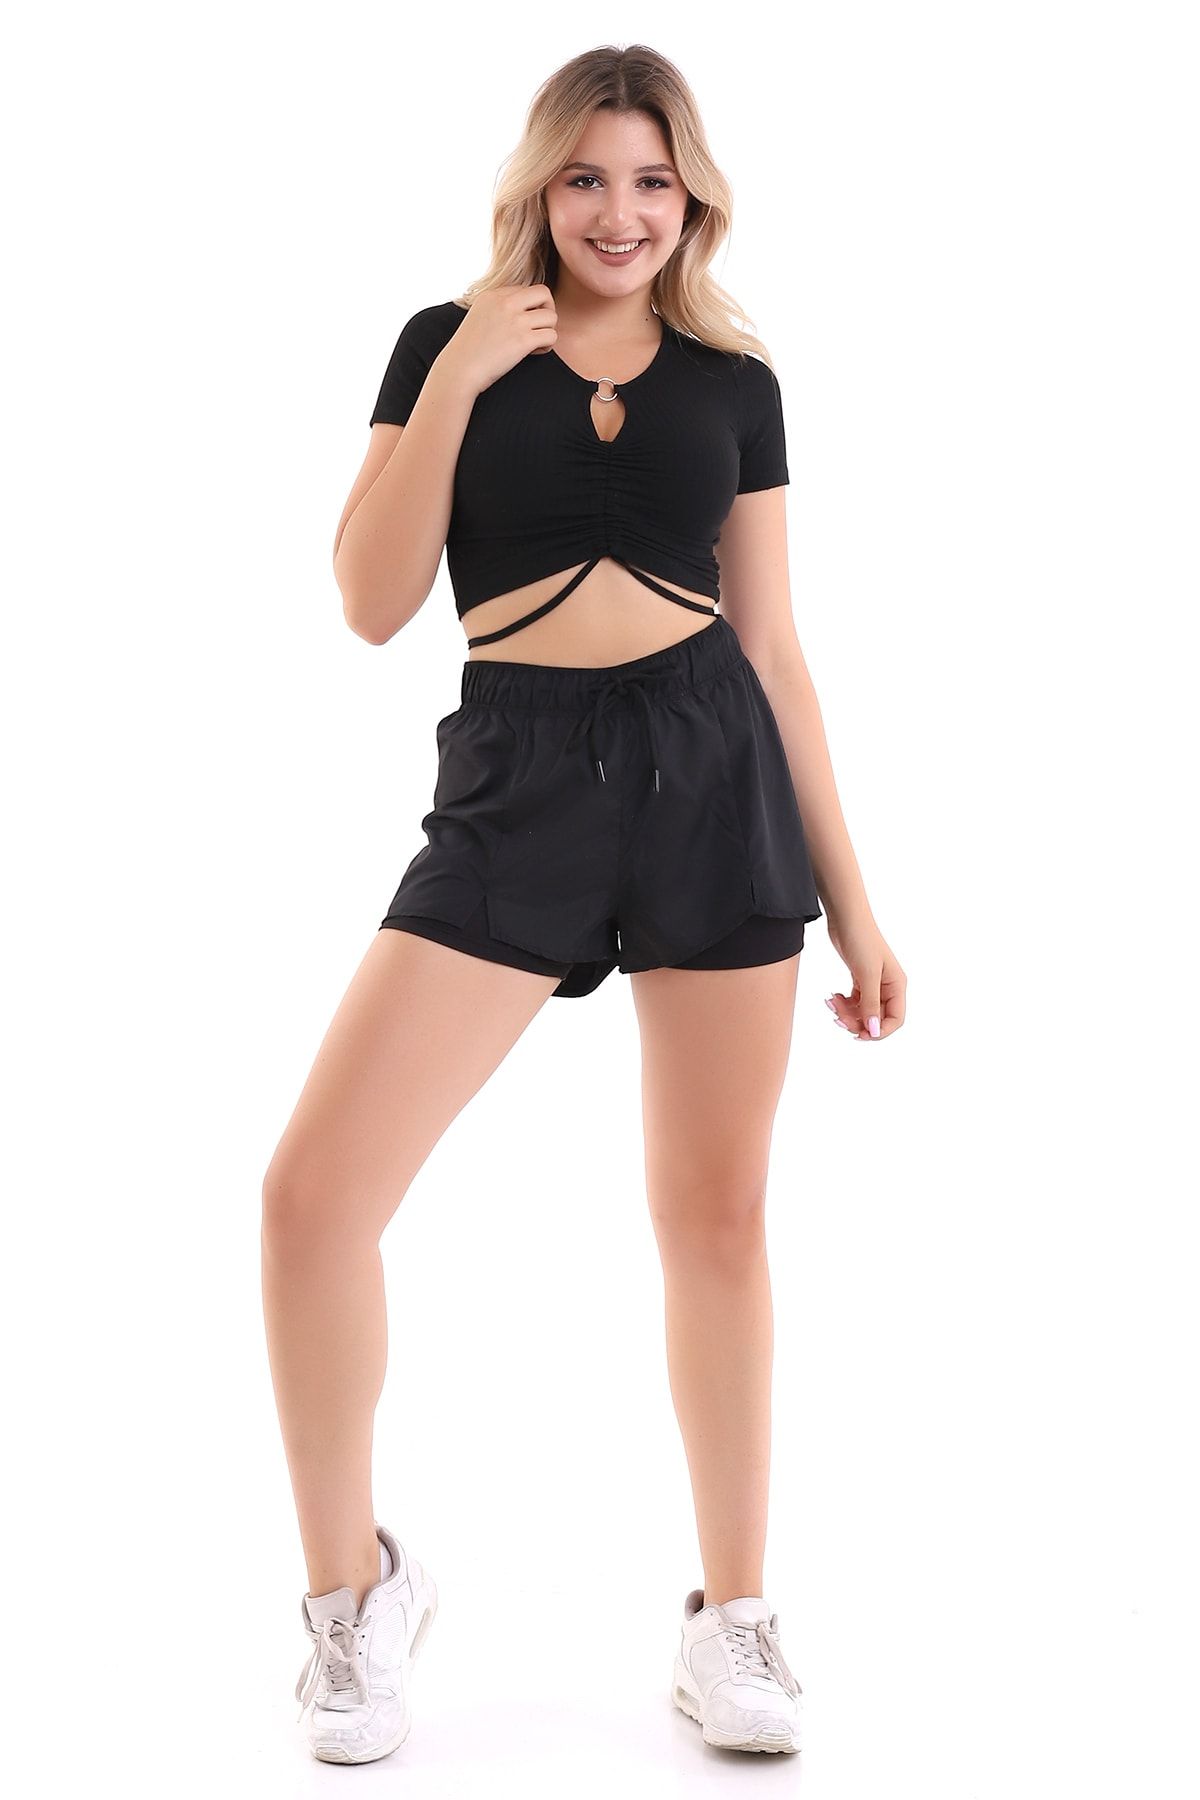 winmoda Survive Sea Shorts with Inner Tights